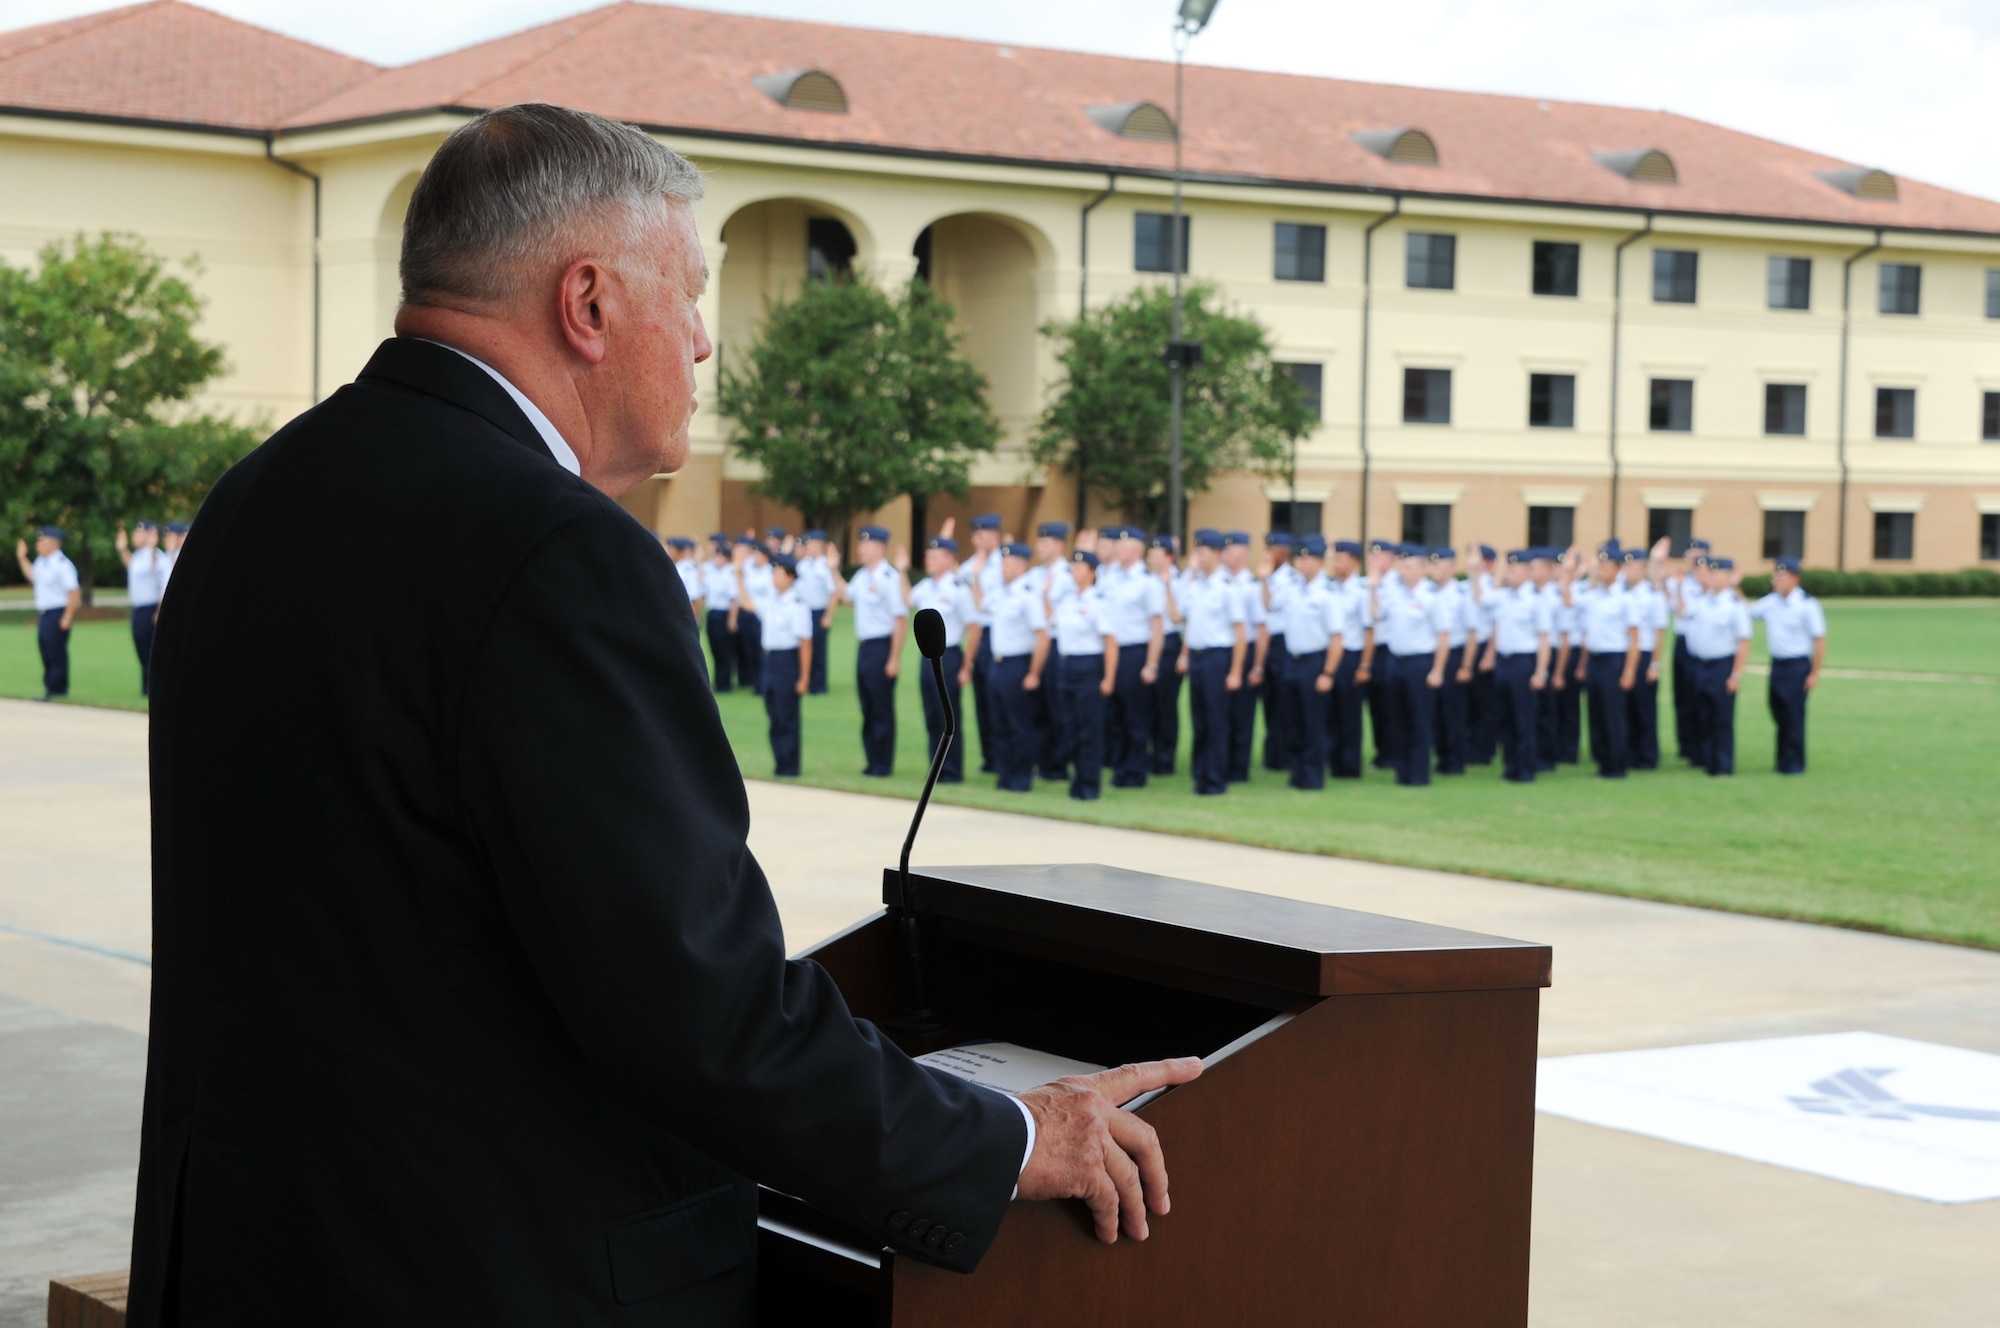 Retired Gen. Eugene Habiger is the reviewing official for the Basic Officer Training graduation parade Aug. 31 and is the 2012 Officer Training School distinguished alumni. (Photo by Bud Hancock)